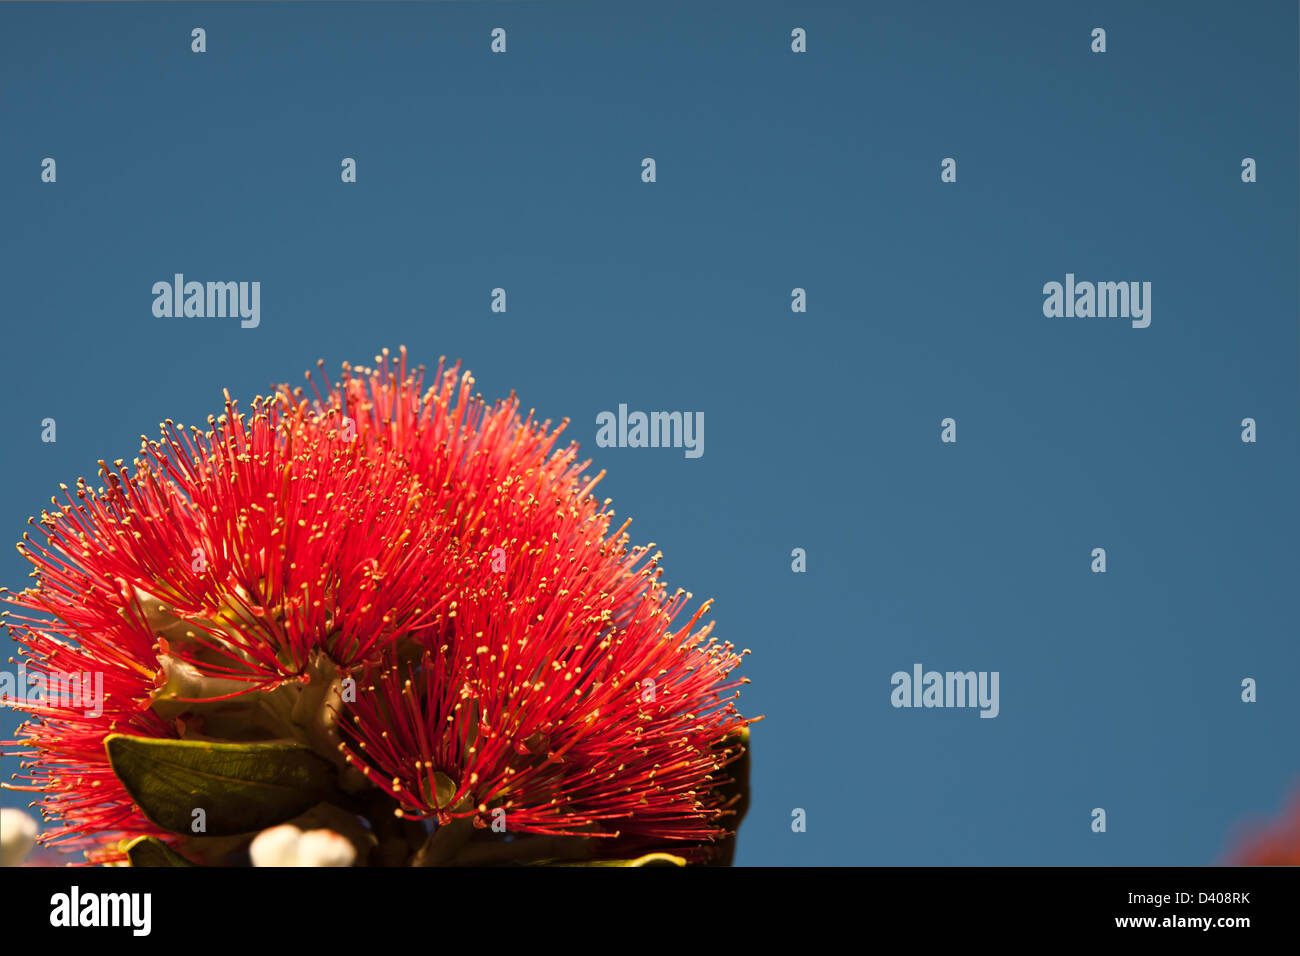 Bright red pohutukawa flower isolated against blue sky. Stock Photo